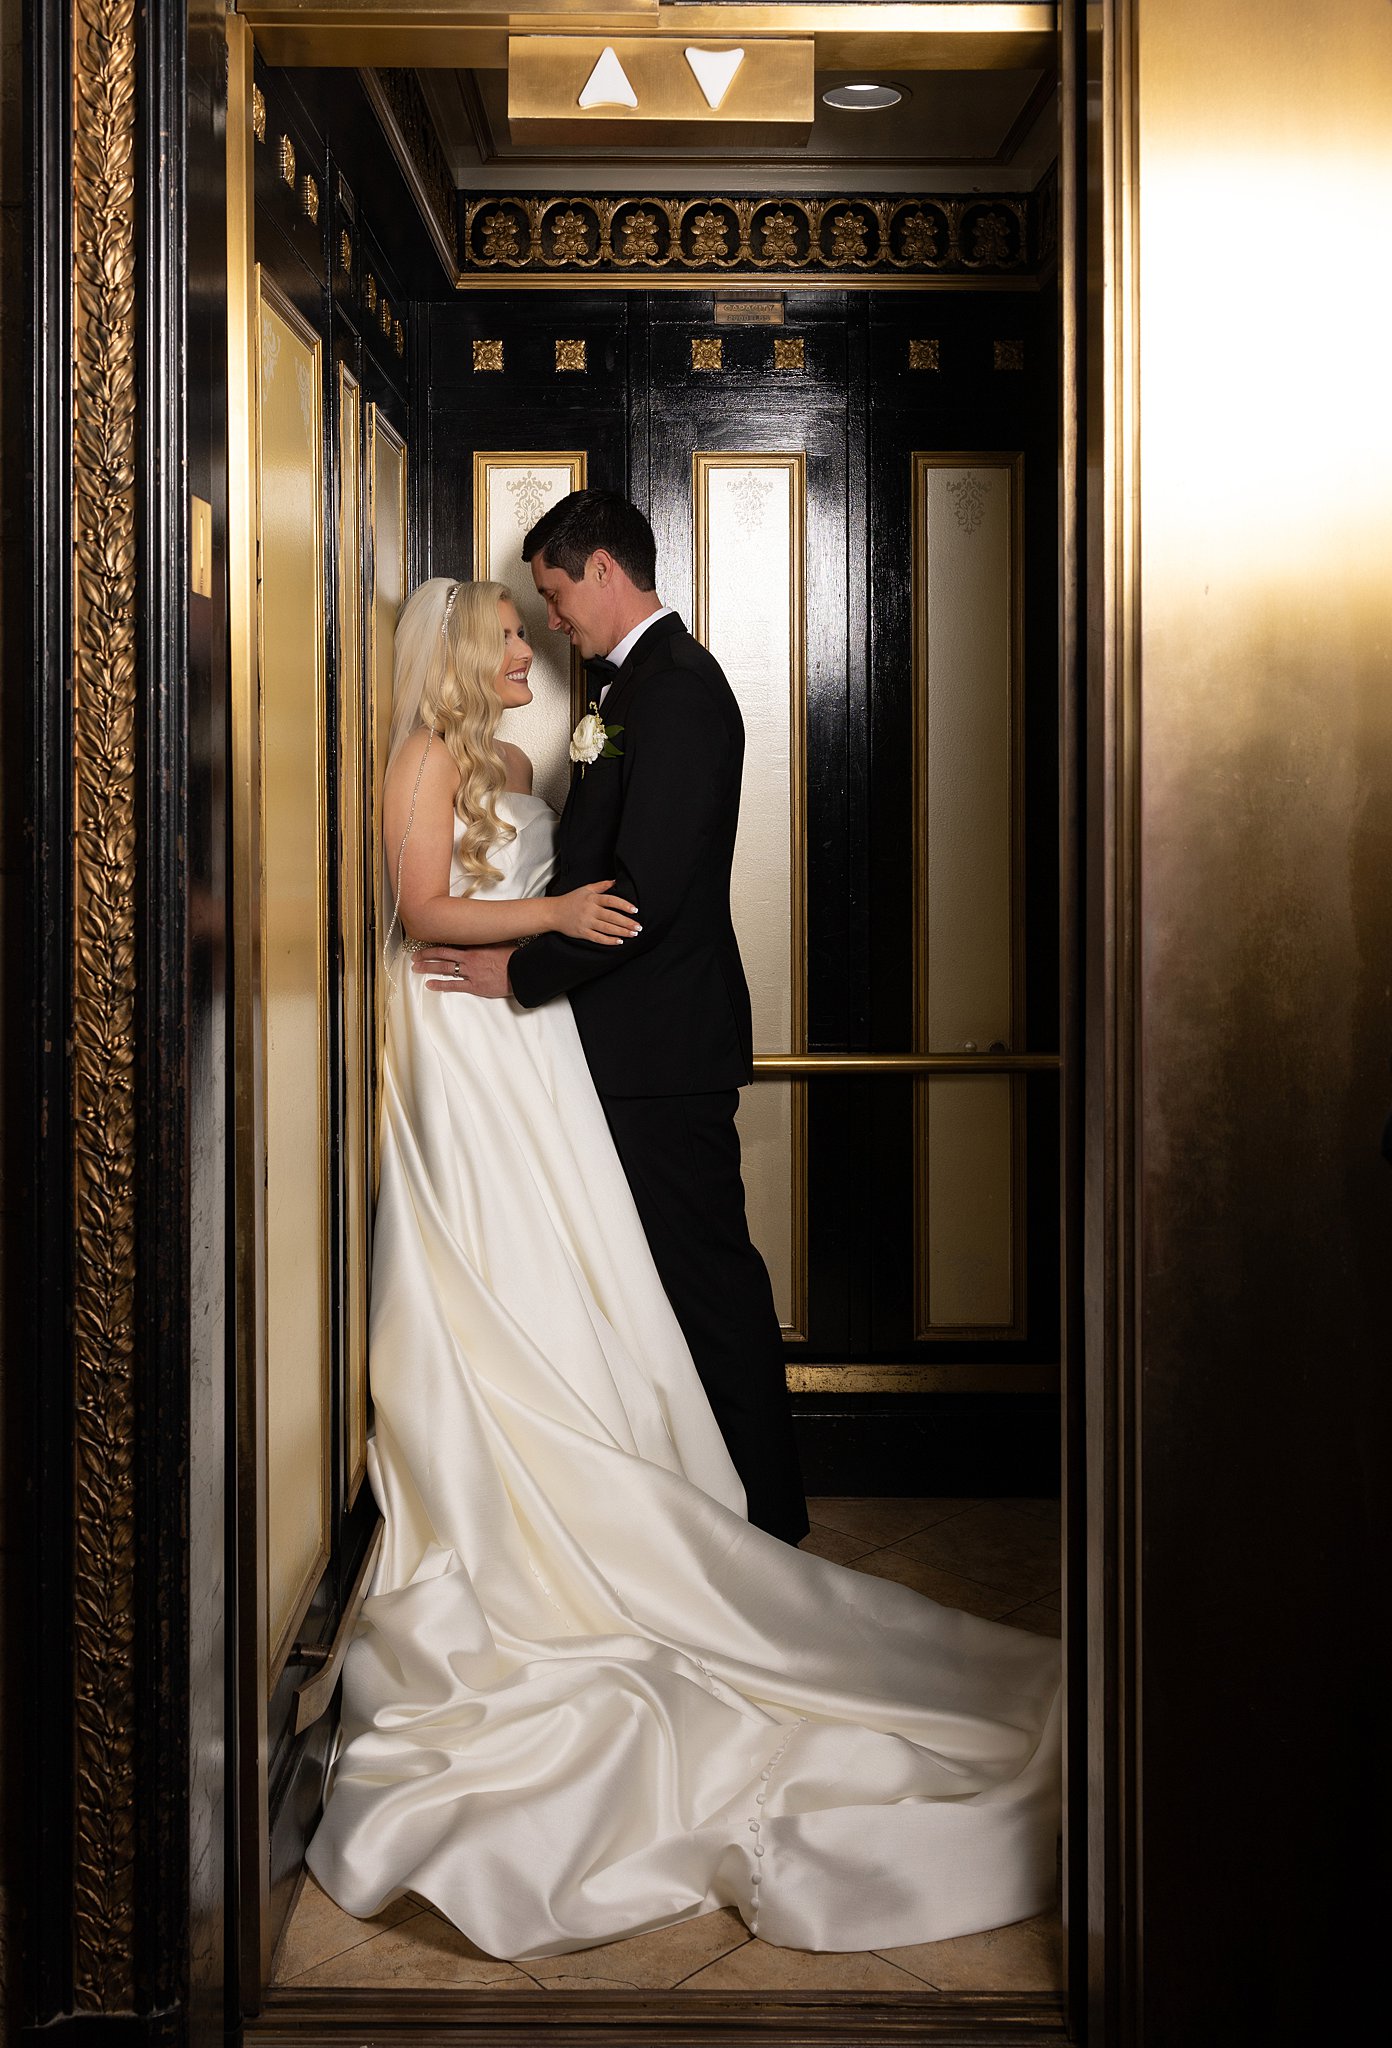 Newlyweds share an intimate moment against the wall of an ornate elevator in the Treasury on the Plaza Wedding venue